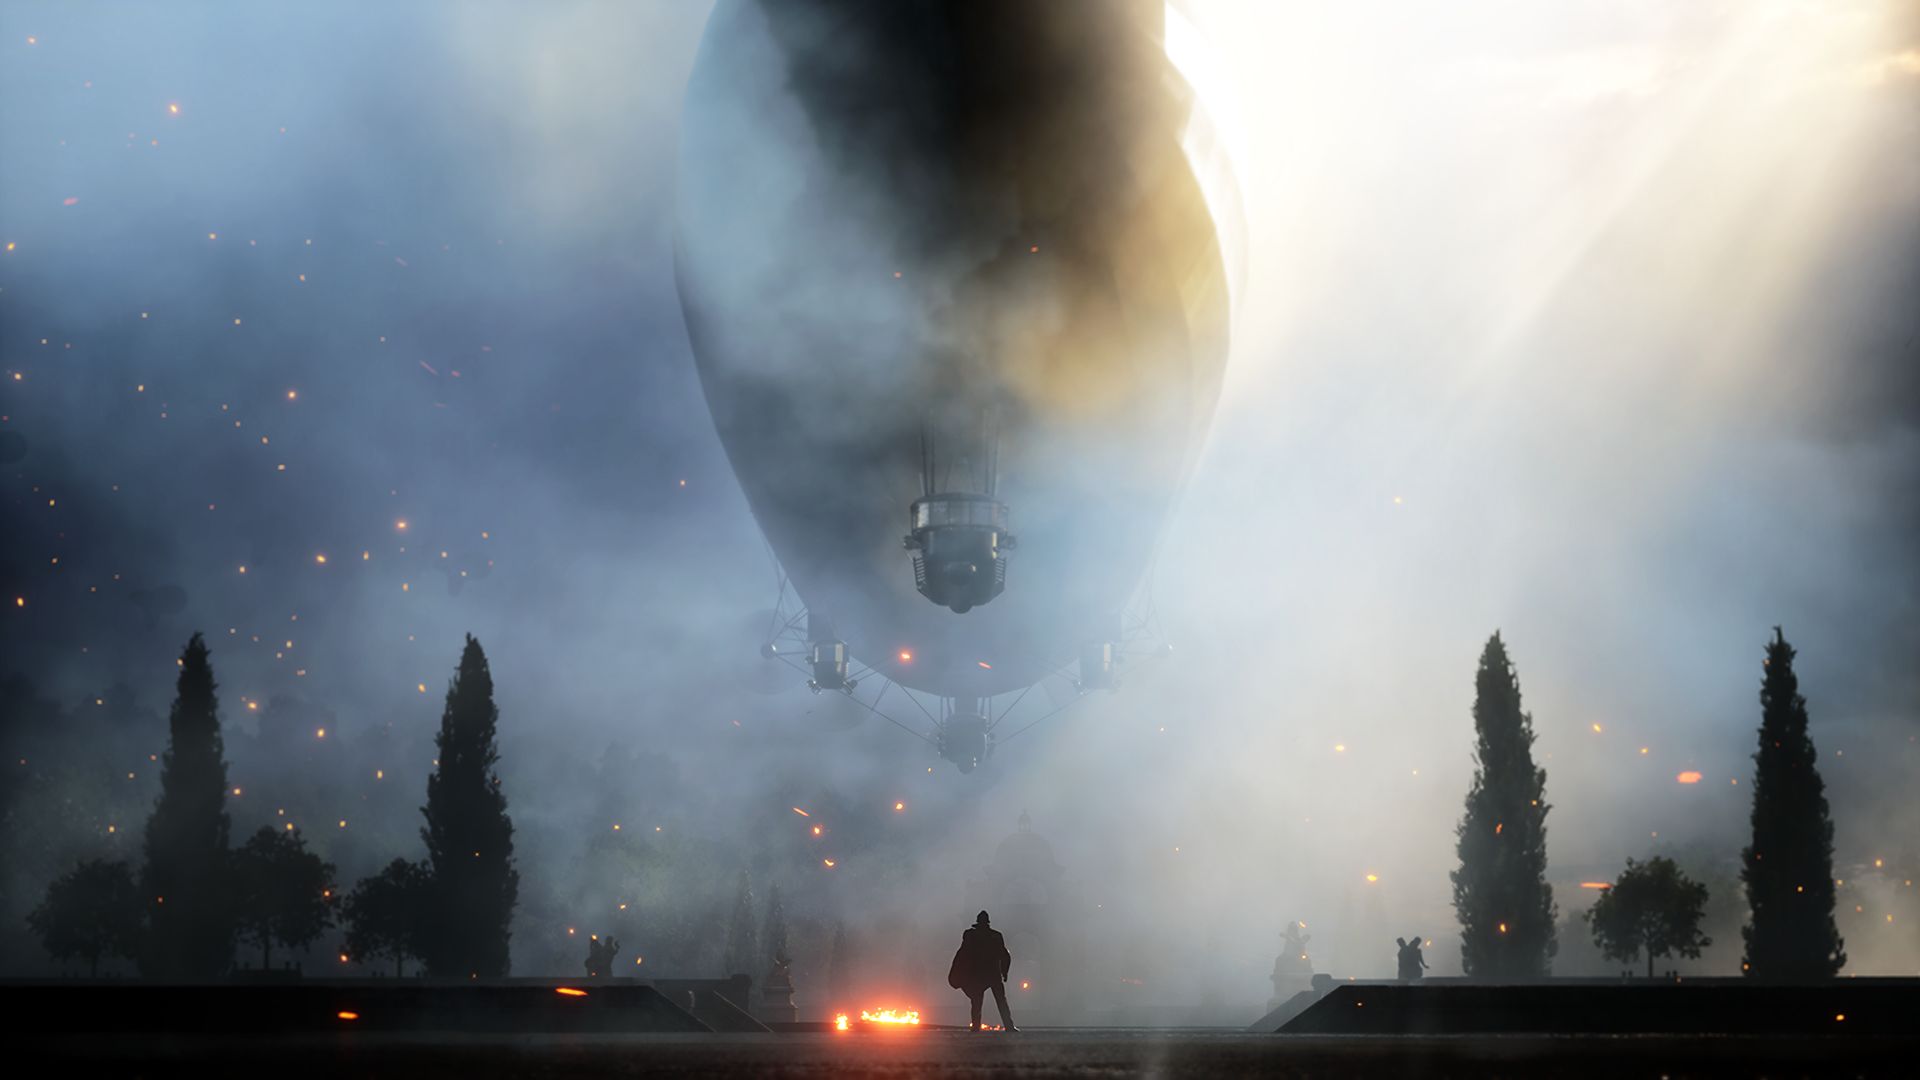 Images of Battlefield 1 | 1920x1080